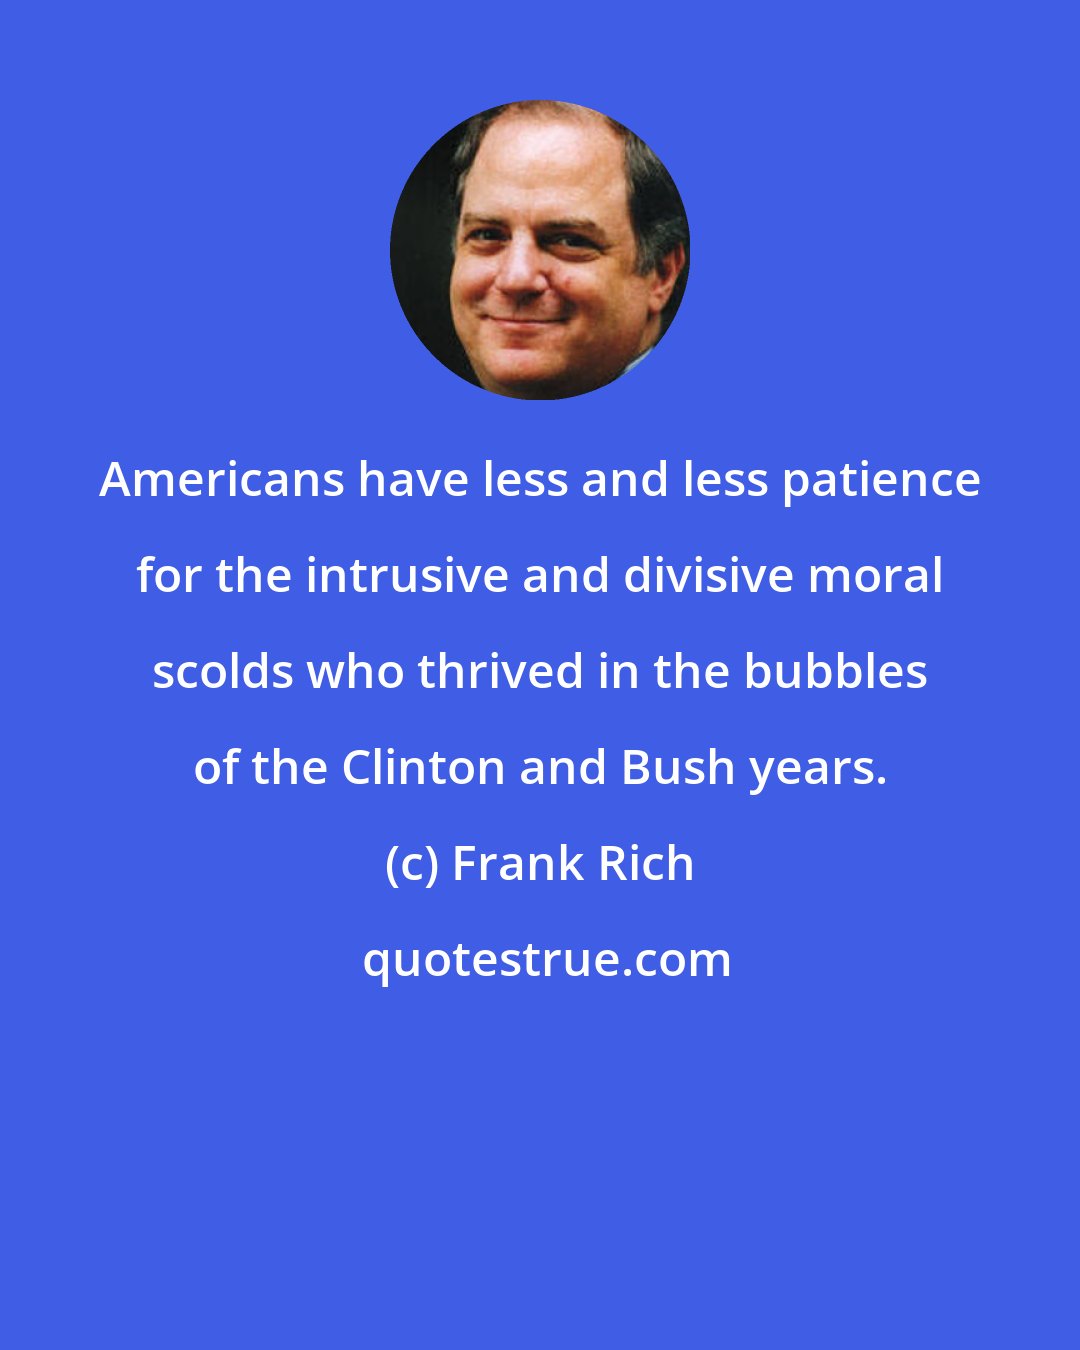 Frank Rich: Americans have less and less patience for the intrusive and divisive moral scolds who thrived in the bubbles of the Clinton and Bush years.